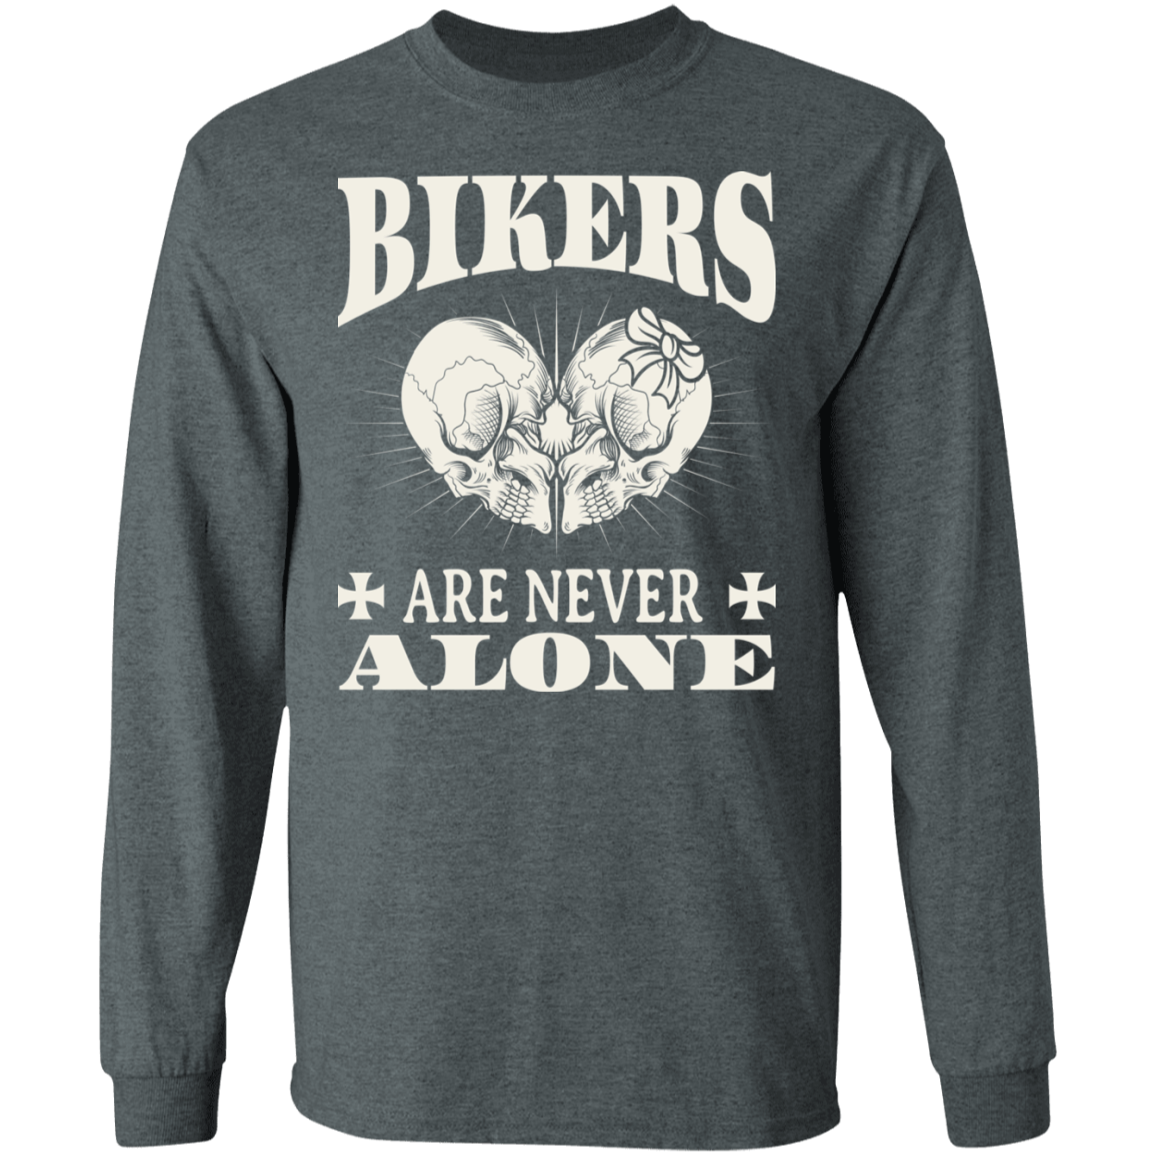 Bikers are never alone Shirt